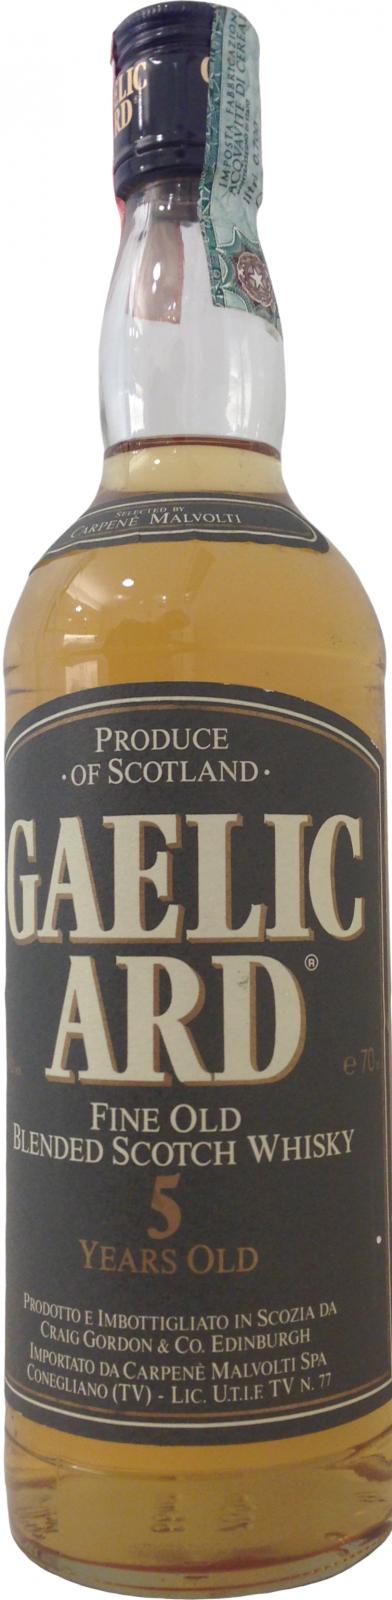 Gaelic Ard 5 Year Old Fine Old Blended Scotch Whisky